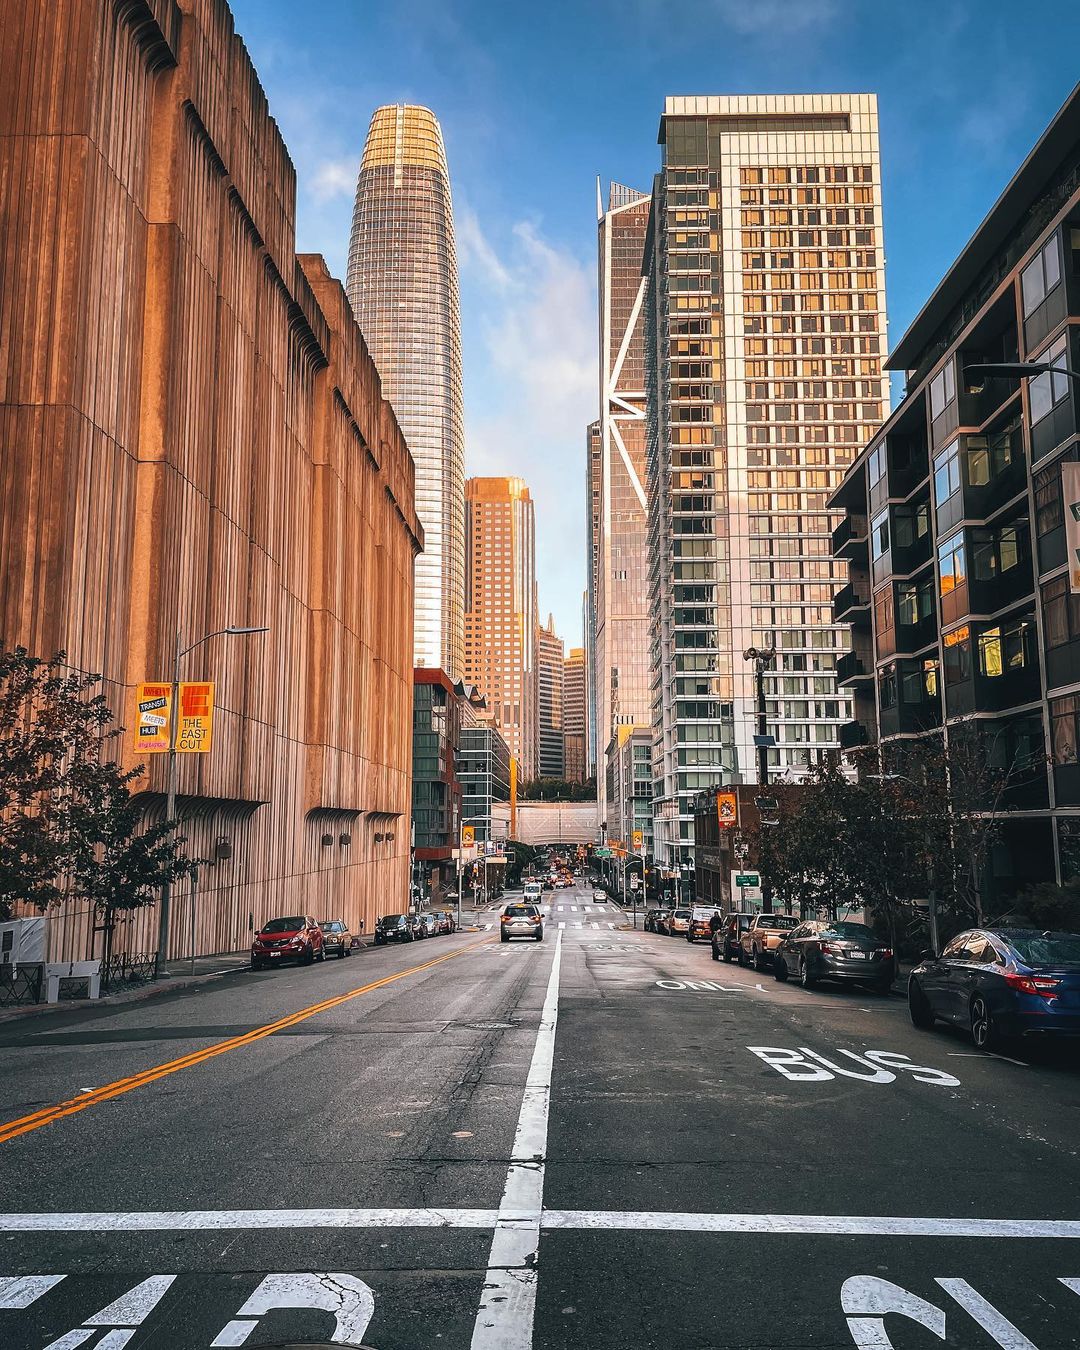 A city street in Downtown San Francisco with a view of high rise buildings. Photo by Instagram user @jennytranphoto